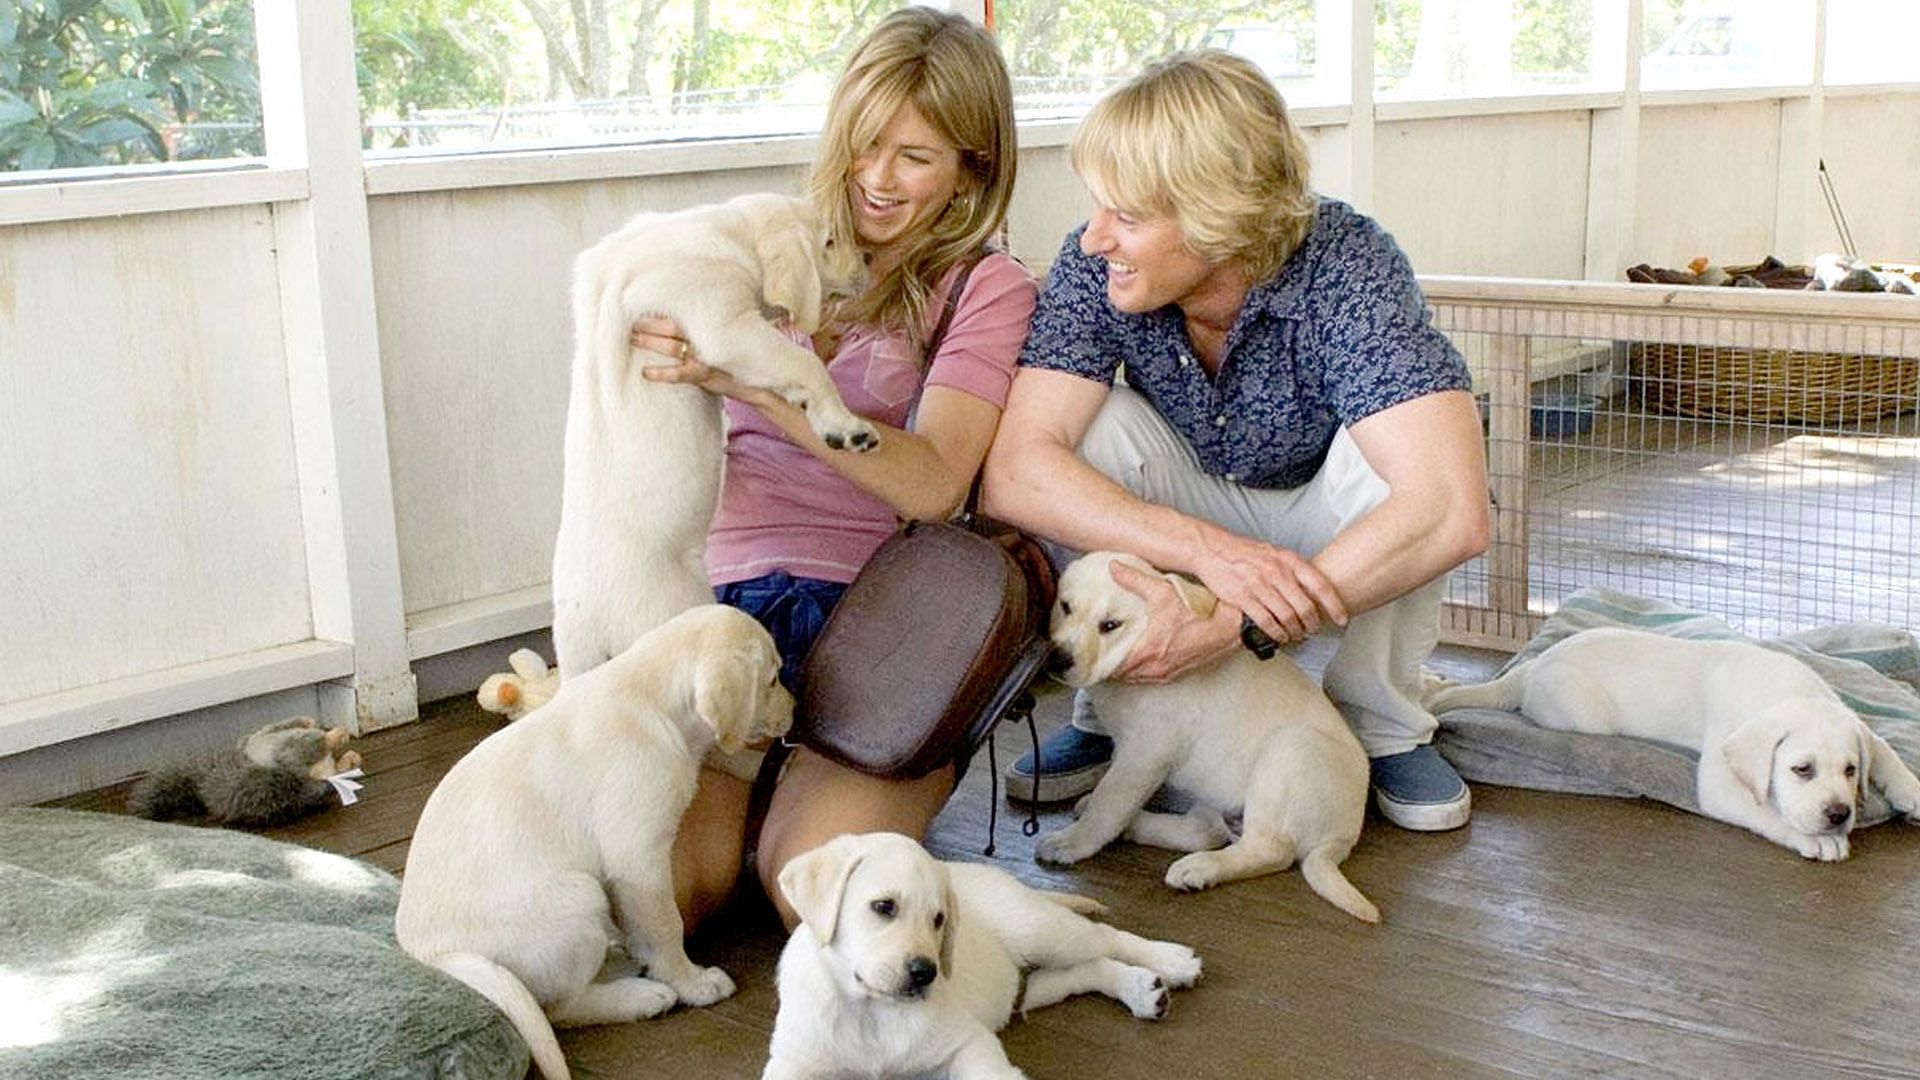 A still from Marley and Me (Image via Amazon)